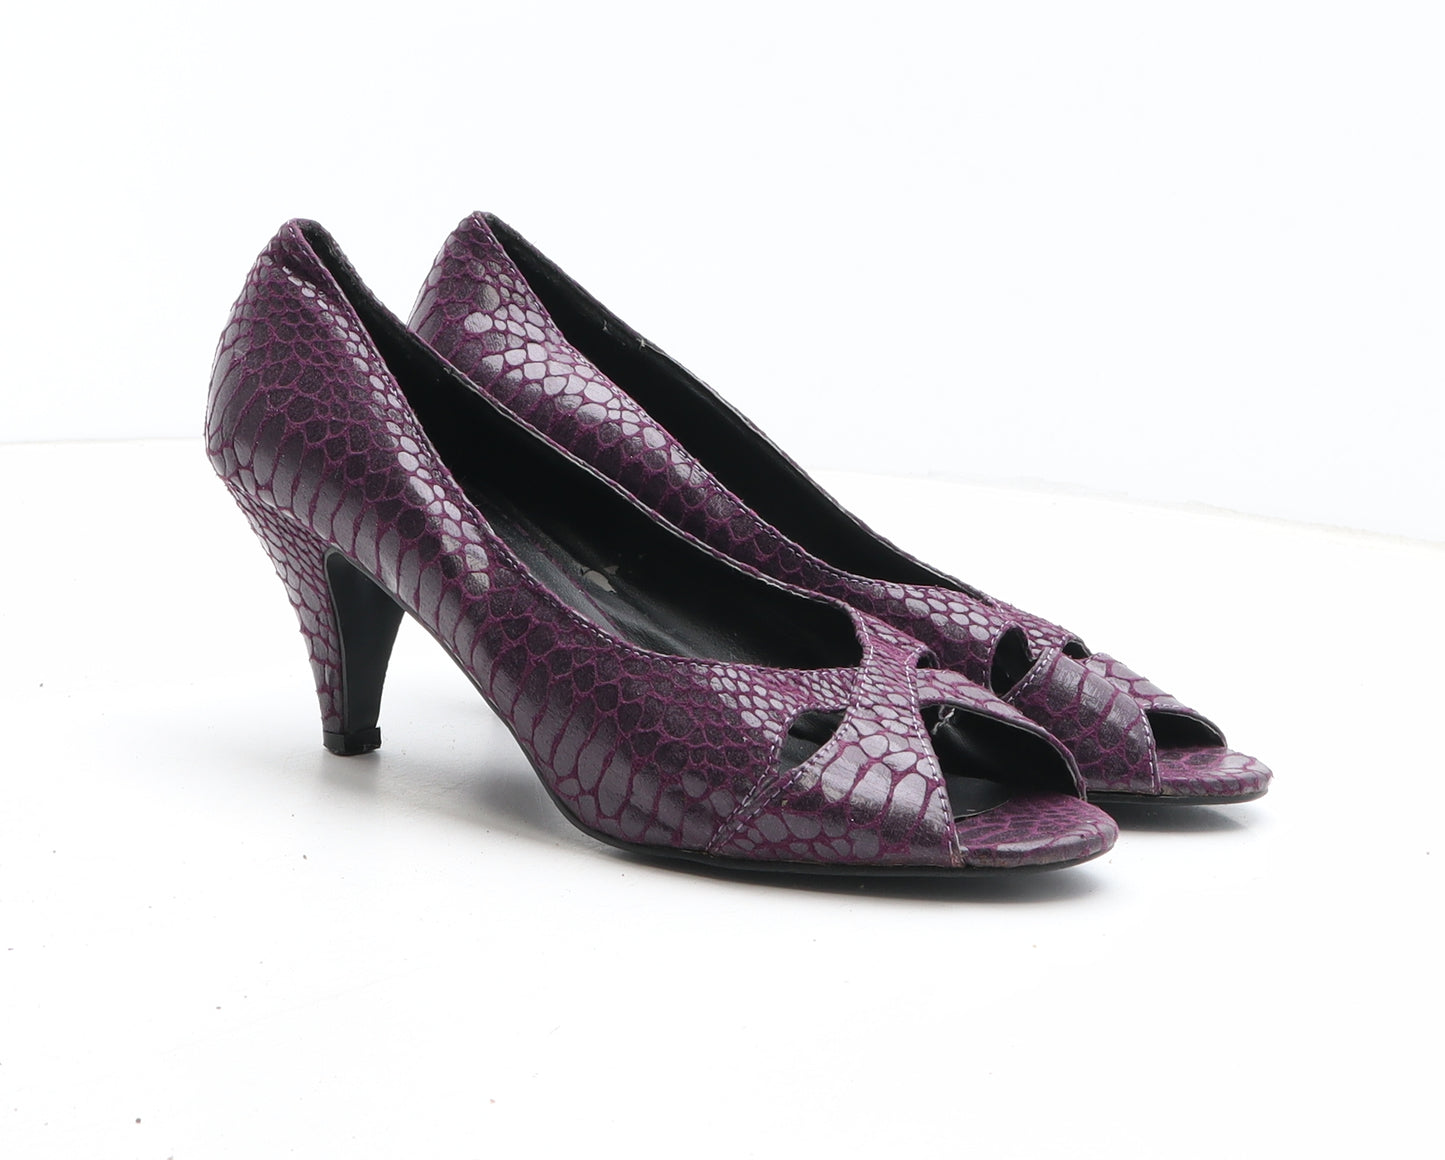 Tommy & Kate Womens Purple Synthetic Court Heel UK - Croc Texture